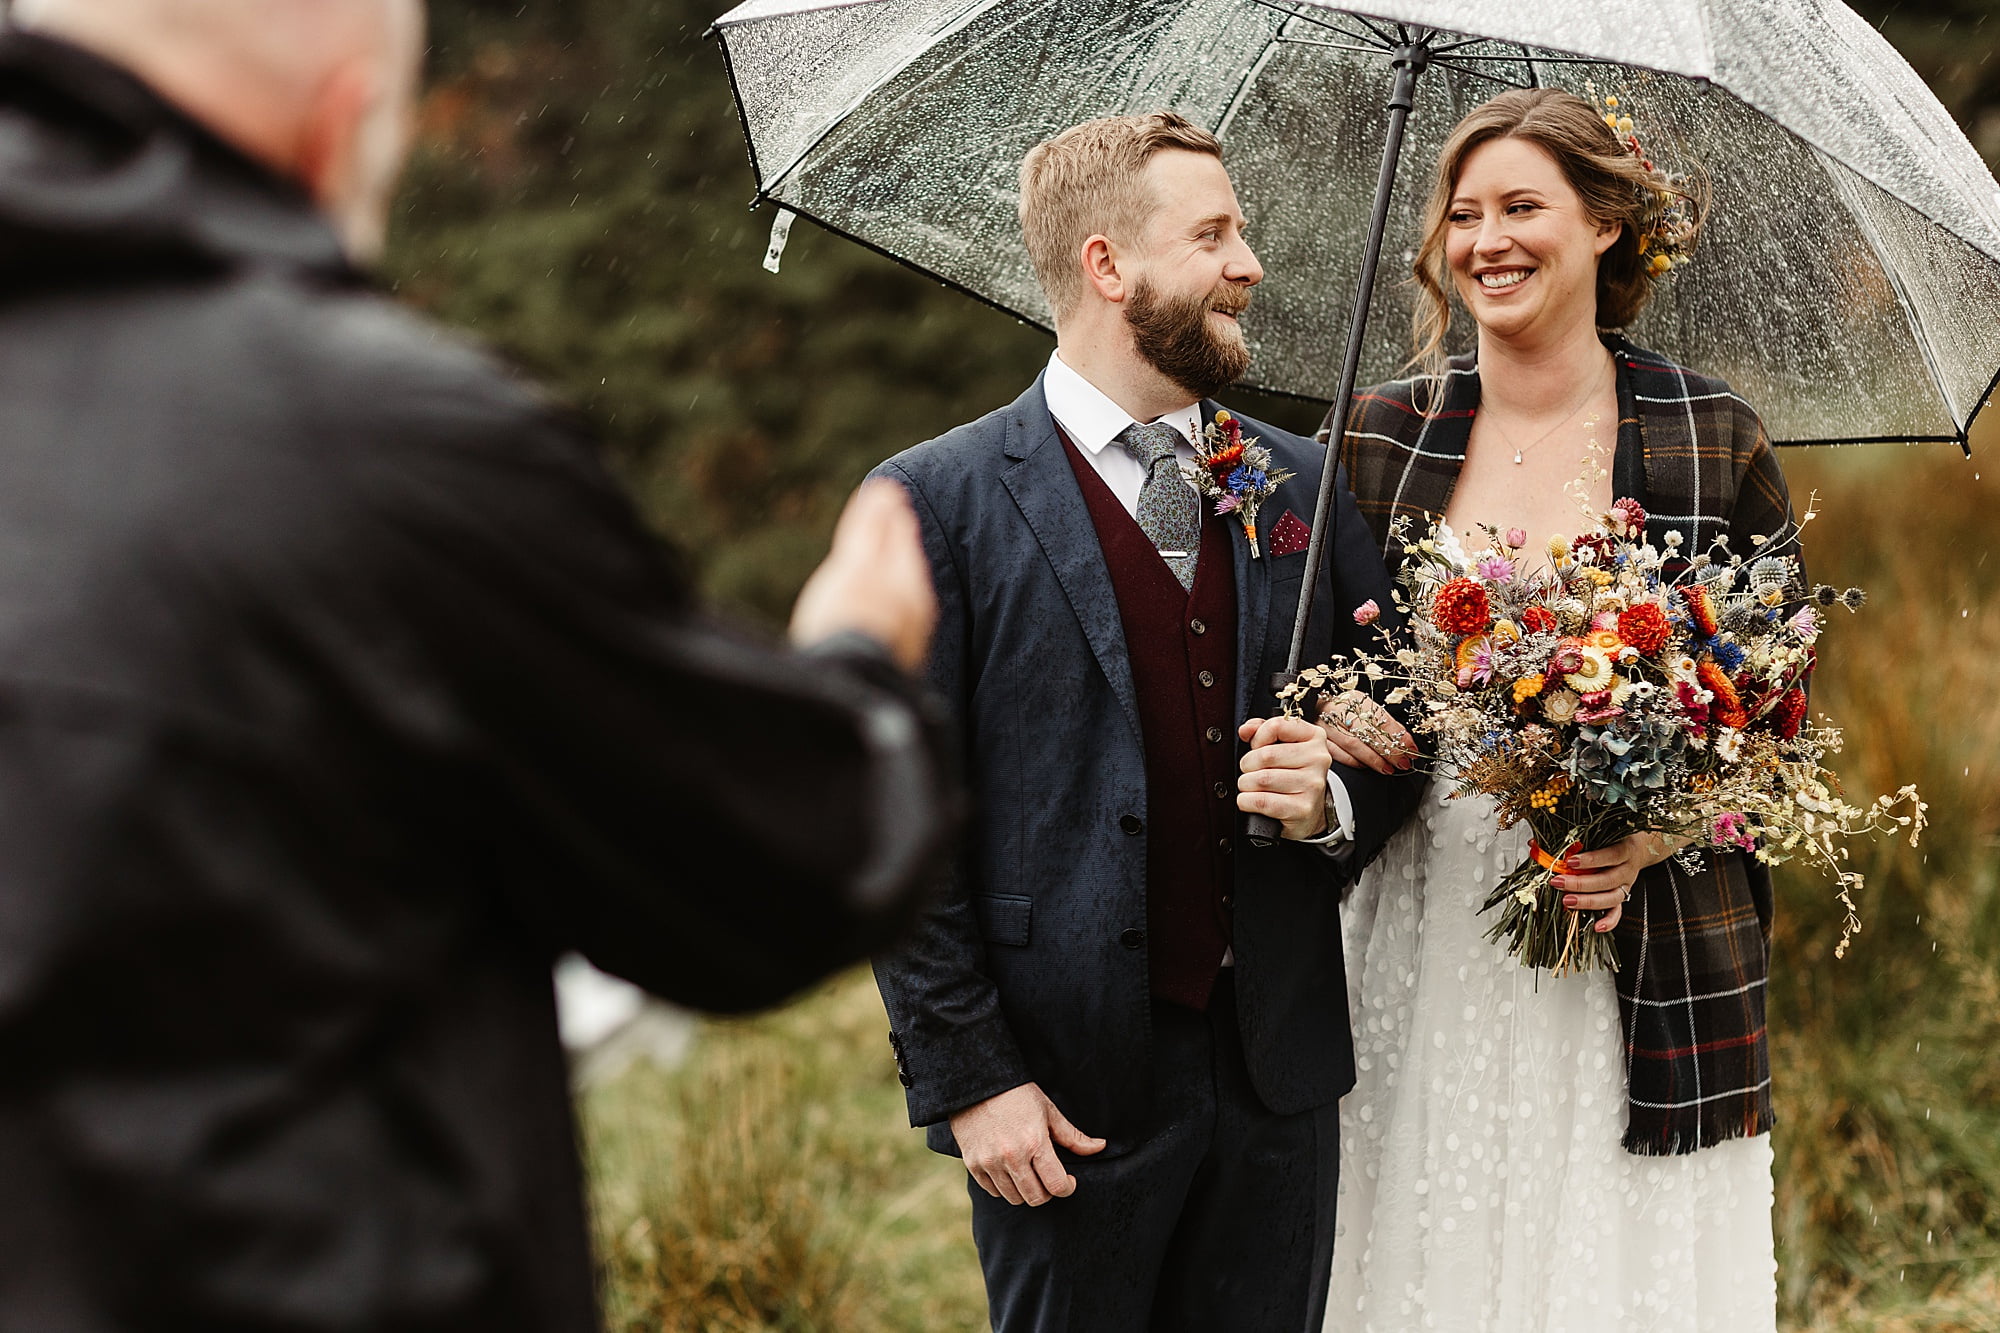 monachyle mhor ceremony outside elopement in the rain with umbrella bride and groom tartan blanket